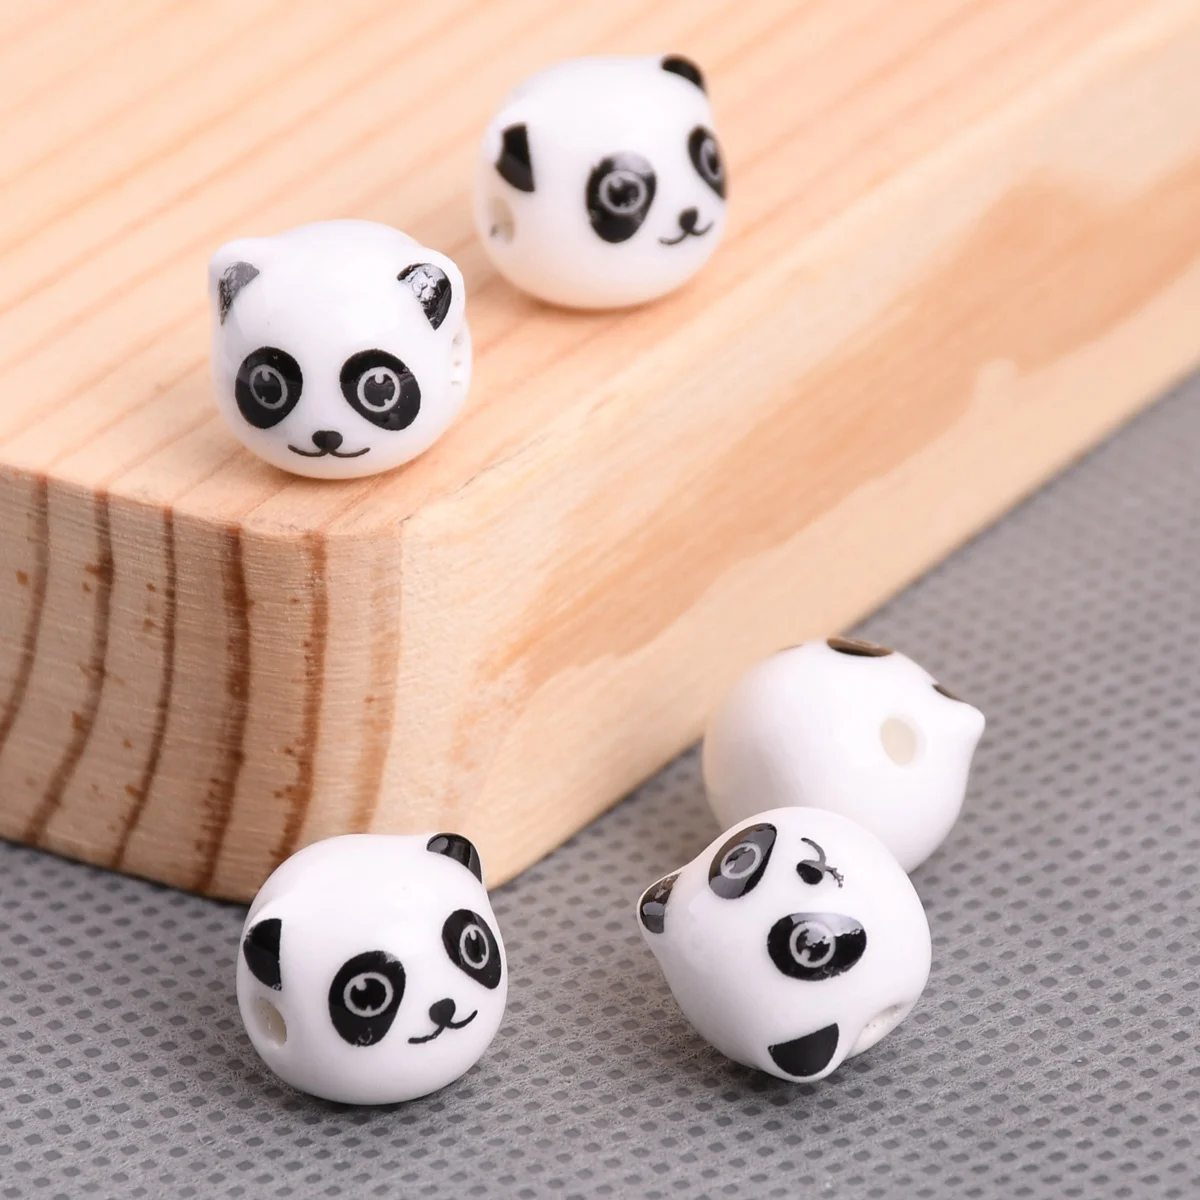 10pcs Panda Head 11mm Handmade Ceramic Porcelain Loose Beads For Jewelry Making DIY Bracelet Findings onion shape ceramic storage box cosmetic jars dressing table jewelry boxes storage jar and lid creative porcelain candy pots